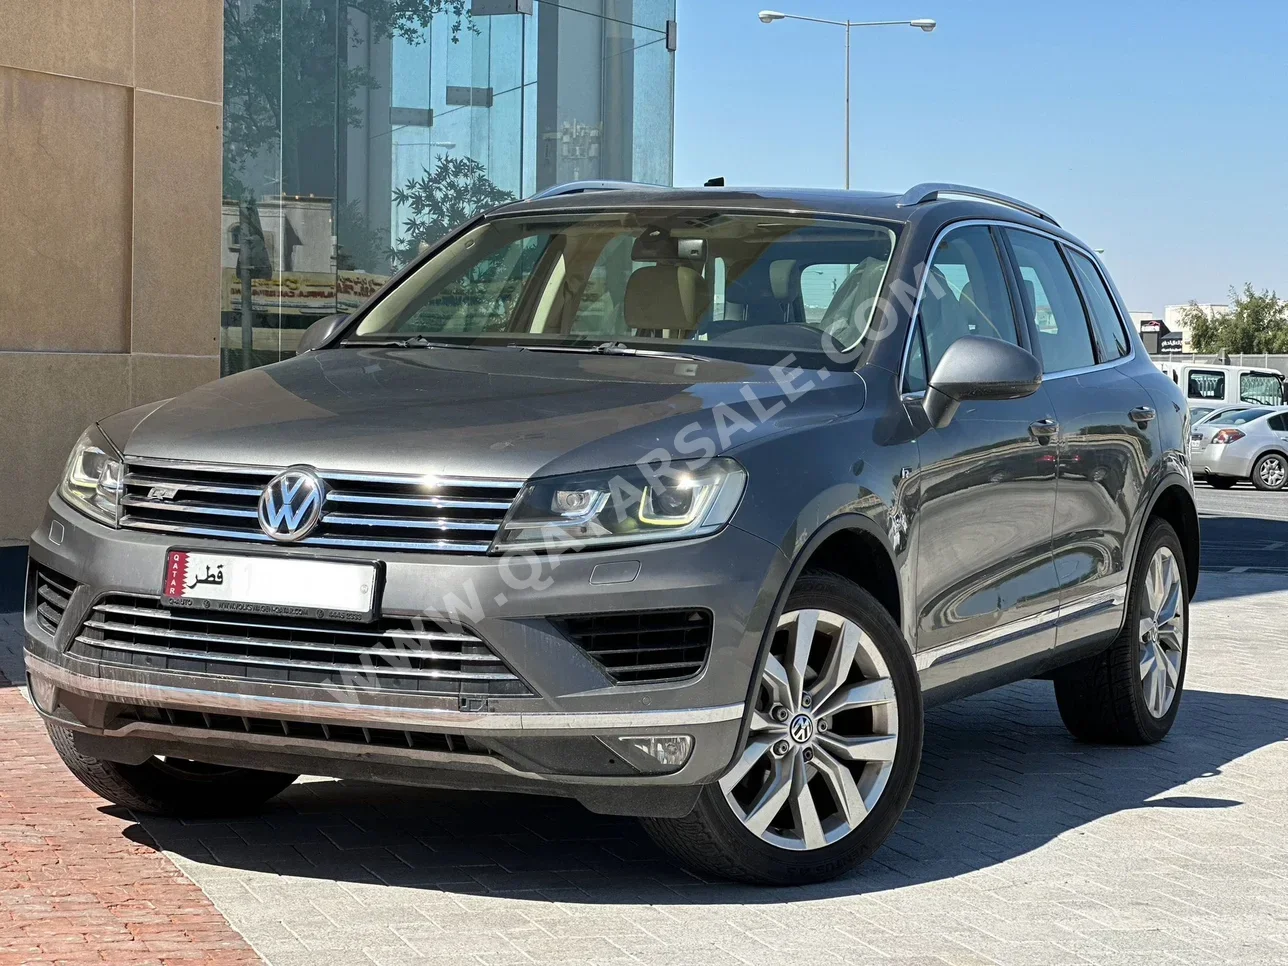 Volkswagen  Touareg  2015  Automatic  110,000 Km  6 Cylinder  All Wheel Drive (AWD)  SUV  Gray